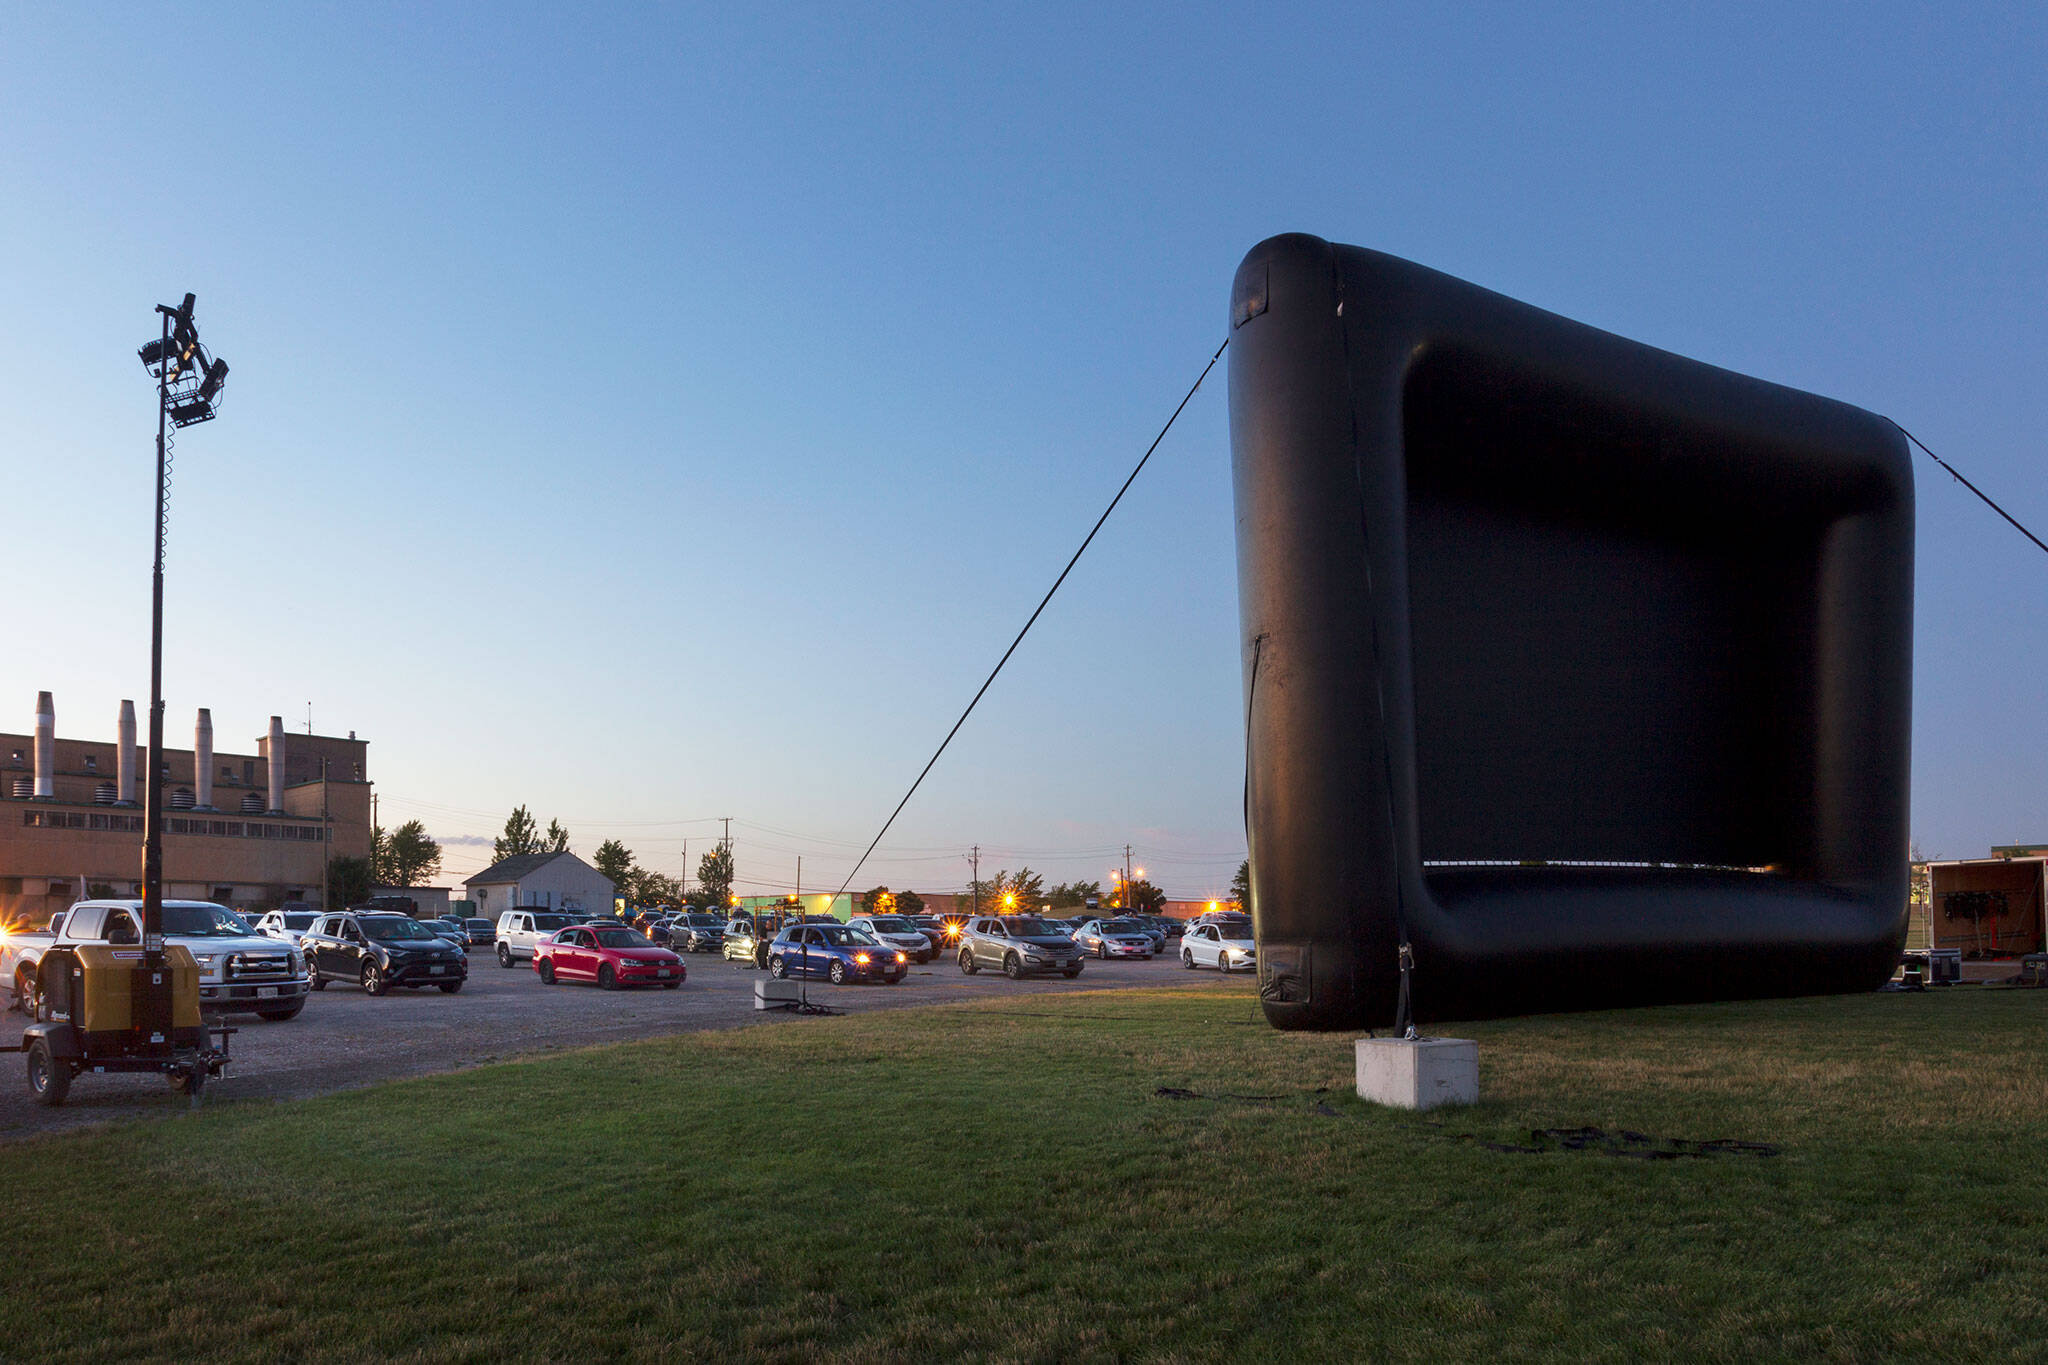 You can watch free movies under the stars in Toronto this summer